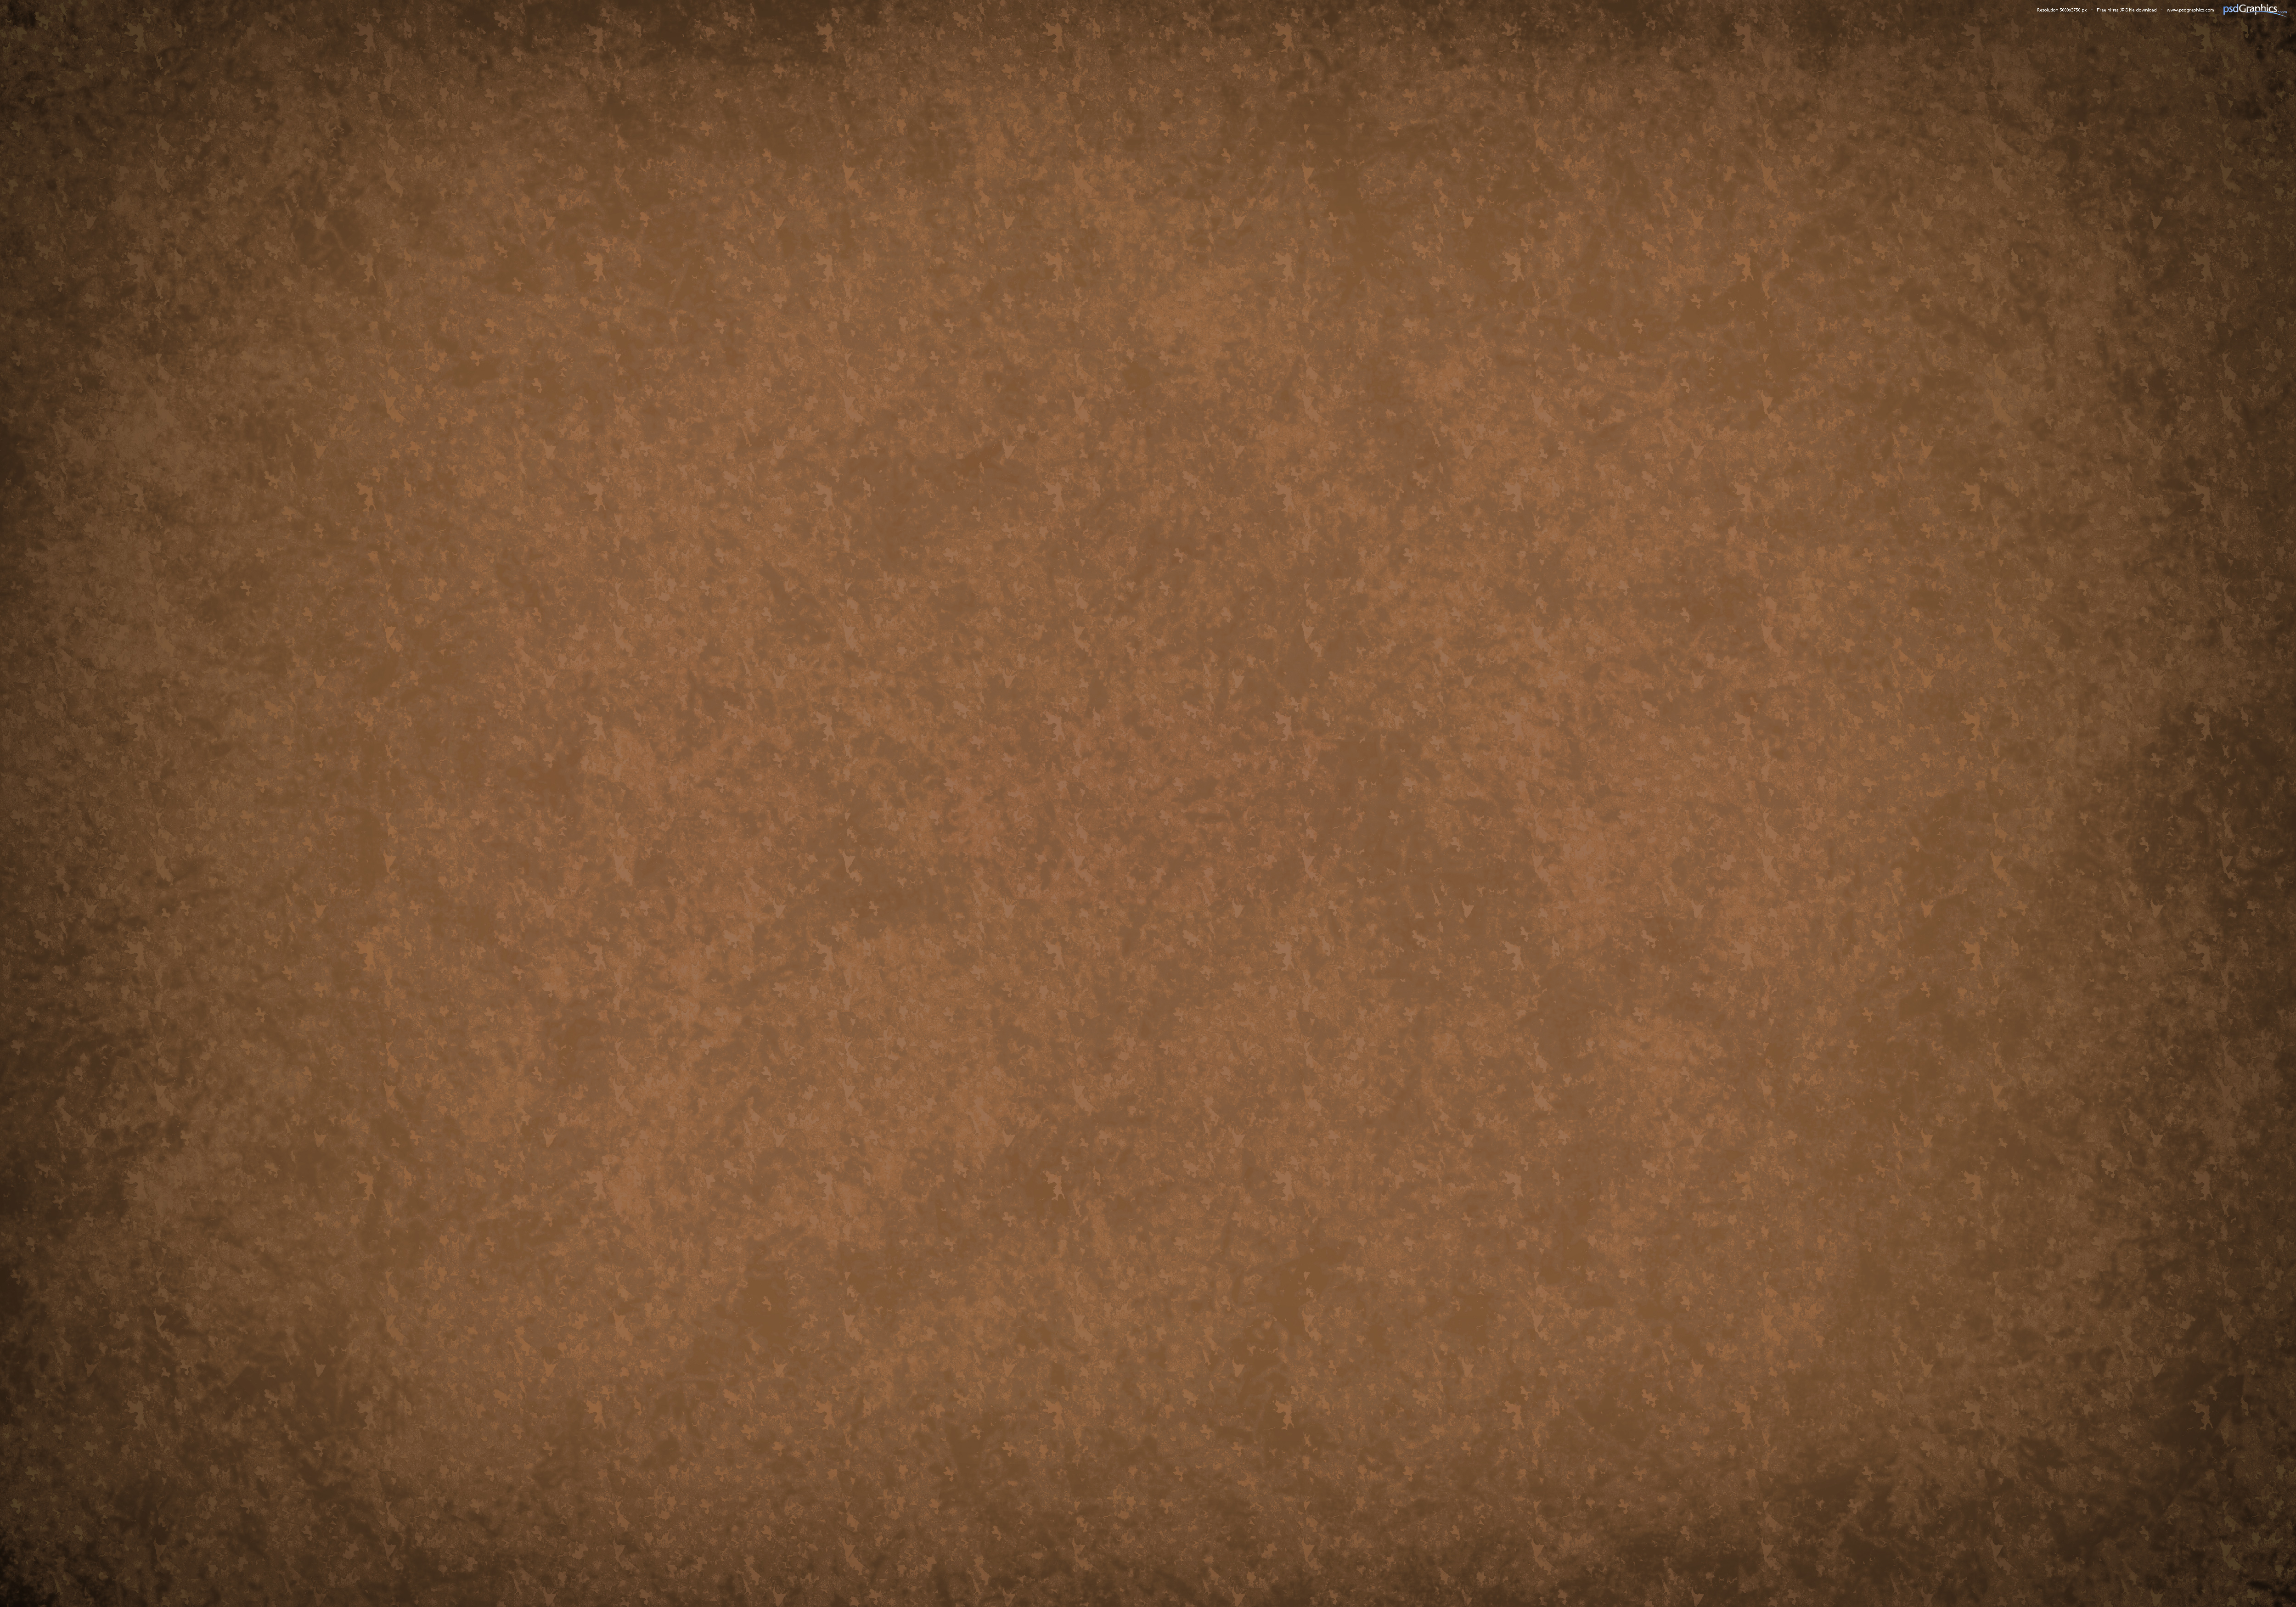 Red And Brown Grunge Background Psdgraphics